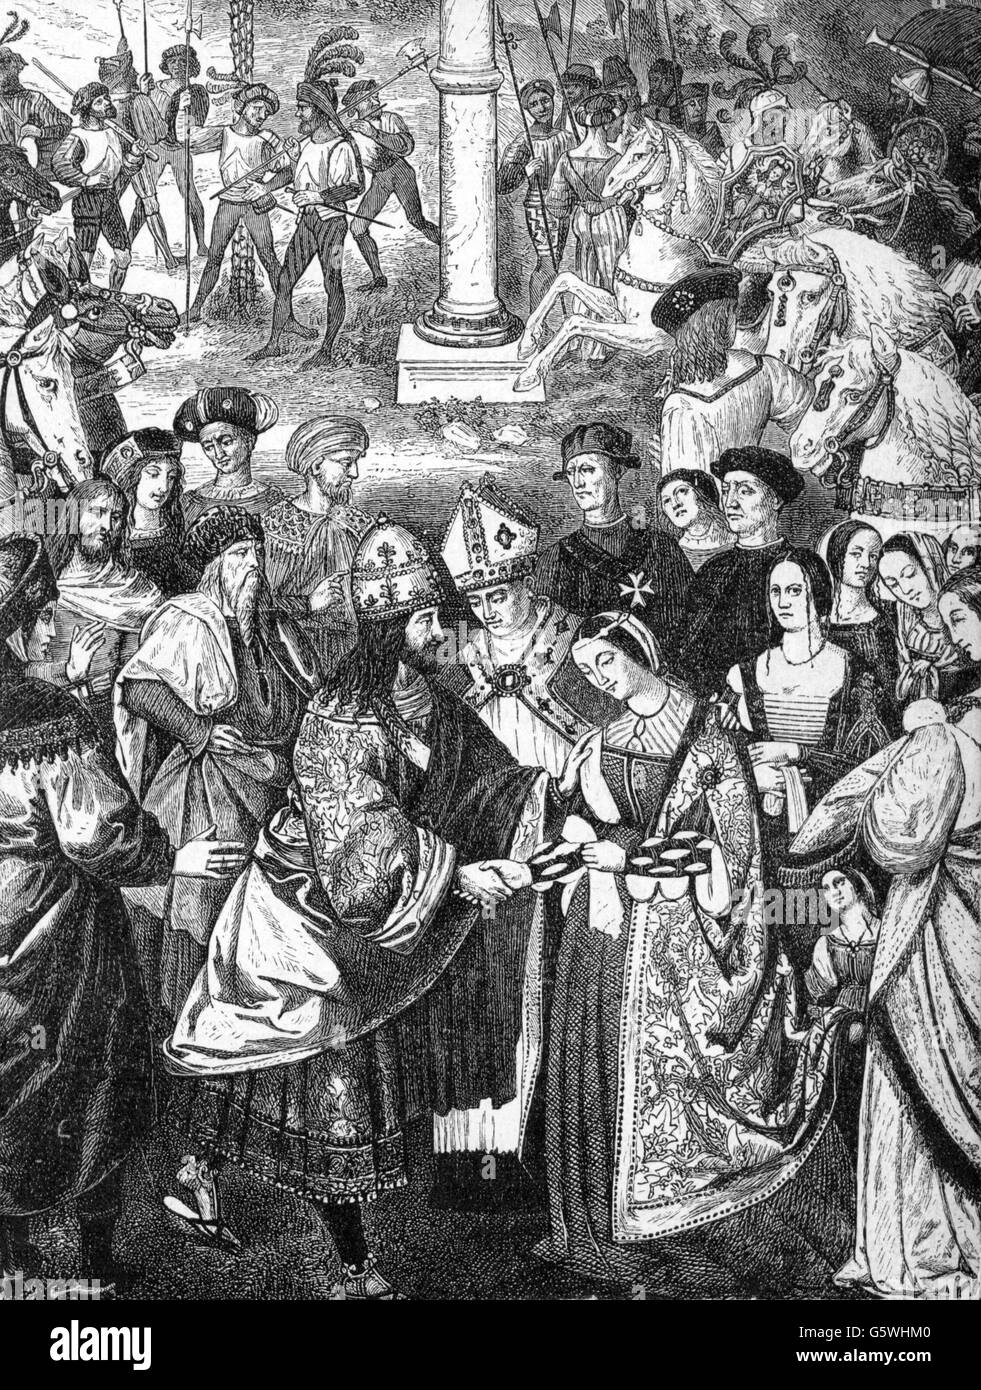 Frederick III 'the Peaceful', 21.9.1415 - 19.8.1493, Holy Roman Emperor 16.3.1452 - 19.8.1493, engagement with princess Eleanor of Portugal, 1451, wood engraving after painting, 19th century, Artist's Copyright has not to be cleared Stock Photo